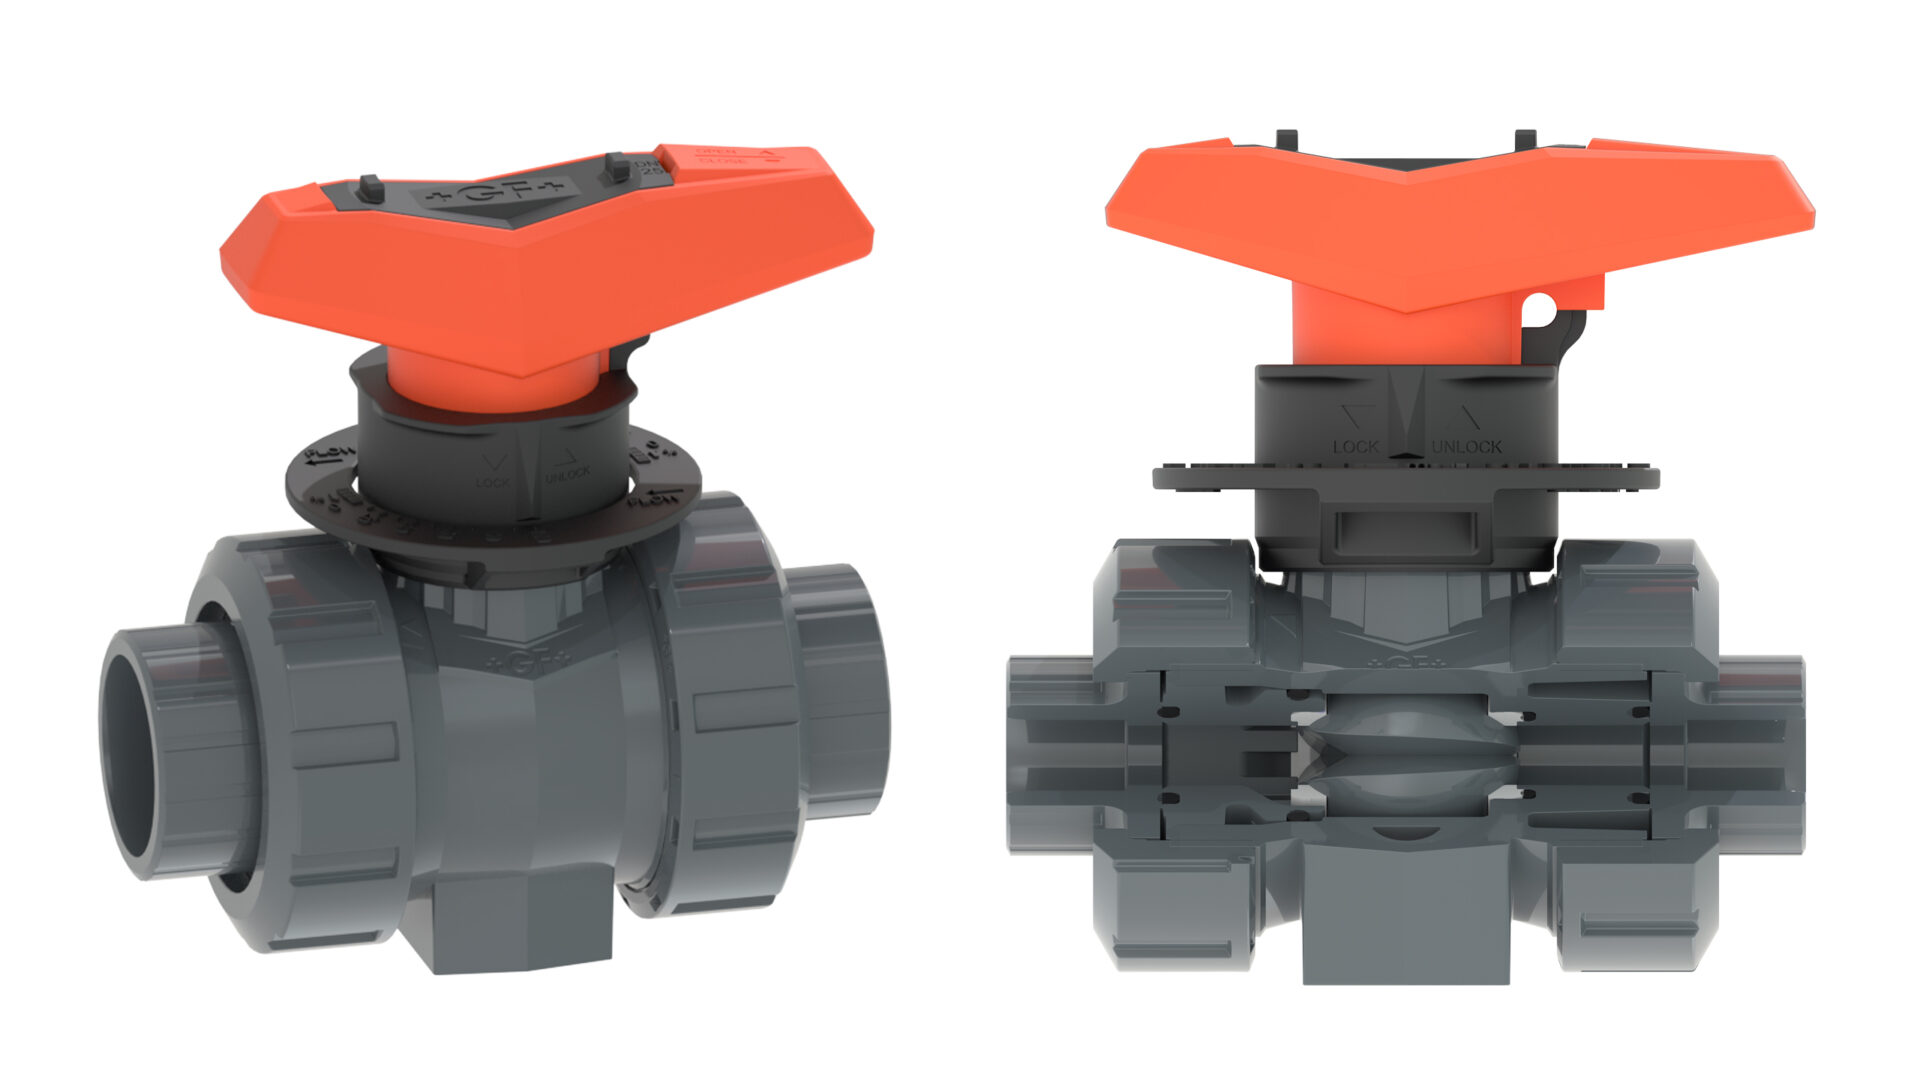 The Ball Valve Transformation – GF Piping Systems Expands its Line of Pro Ball Valves